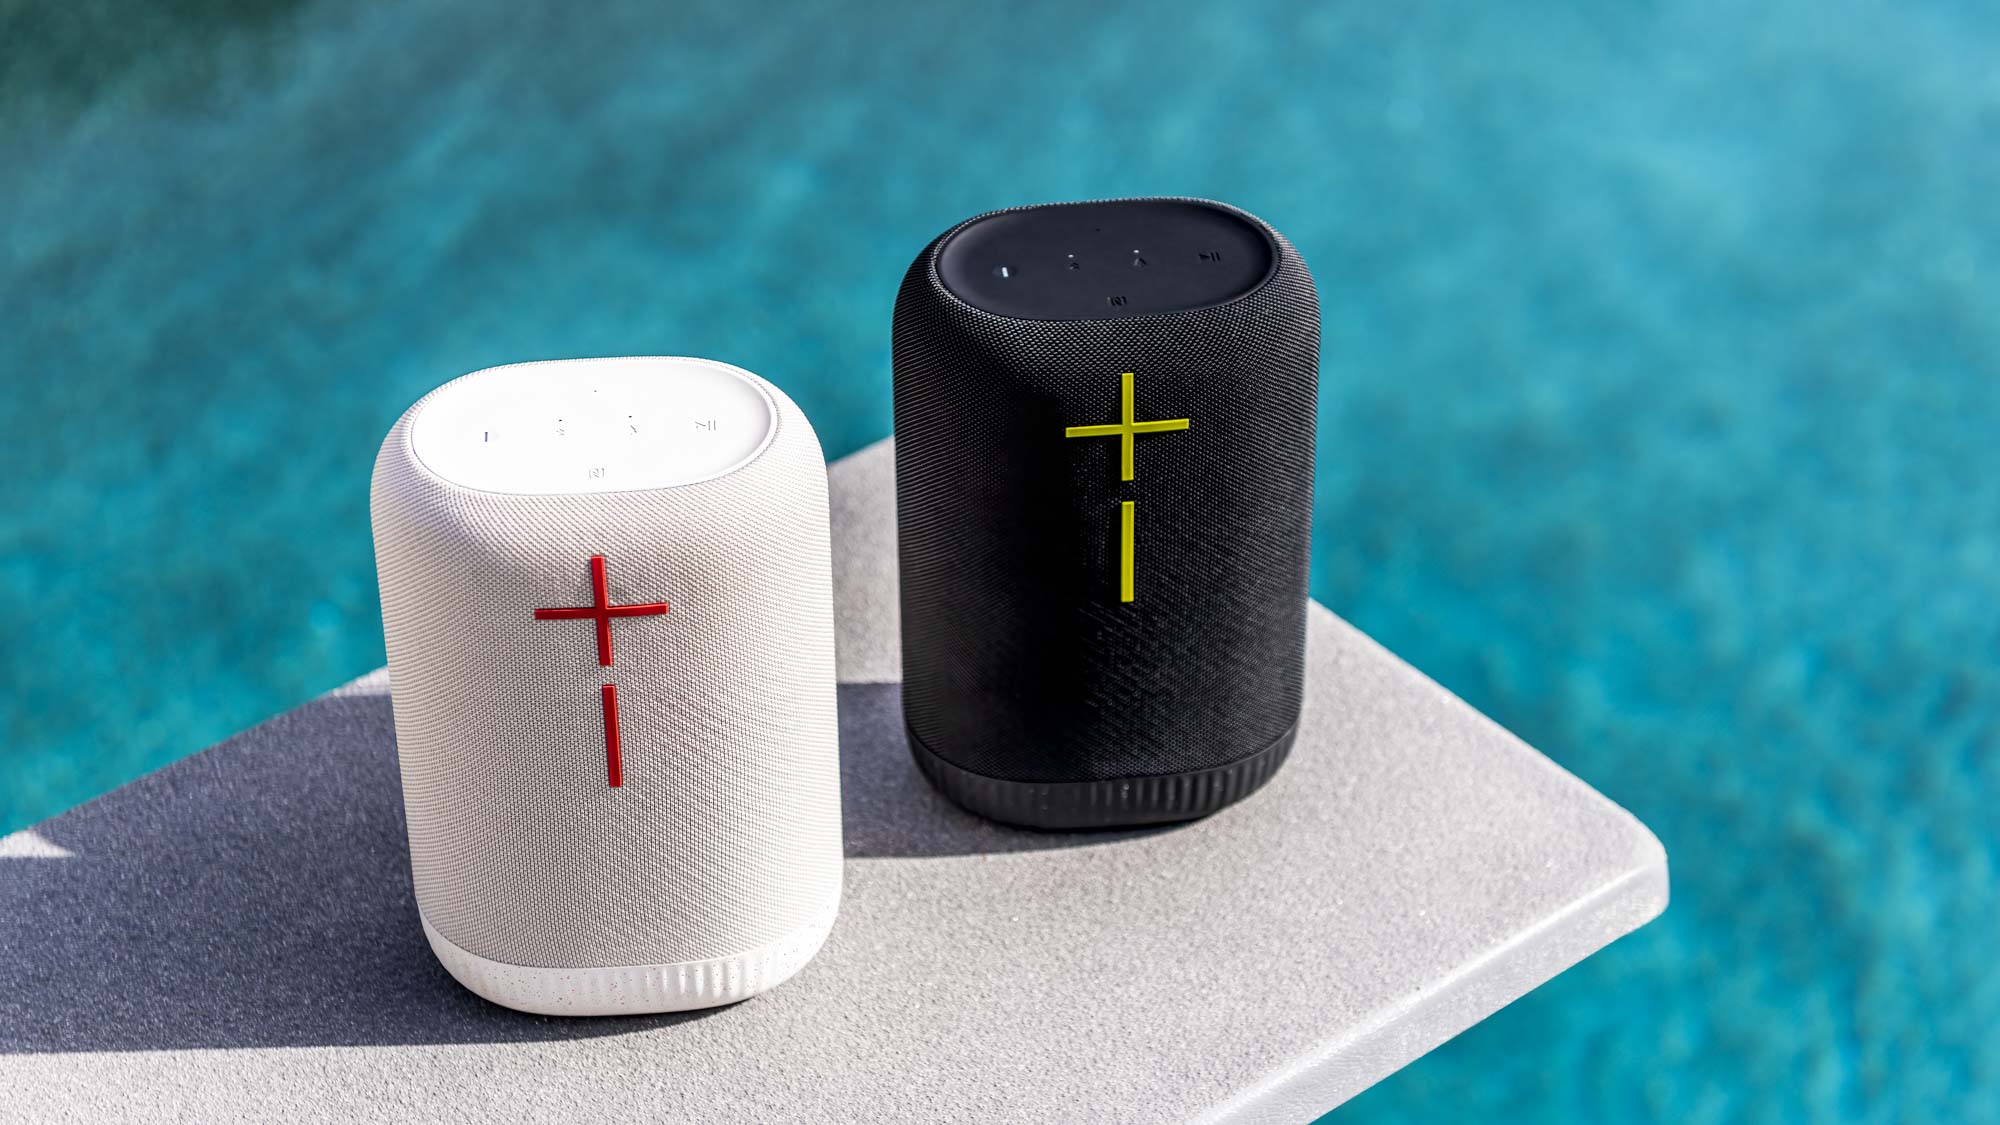 Ultimate Ears Epicboom PR image on showing speakers in black and white versions by a pool